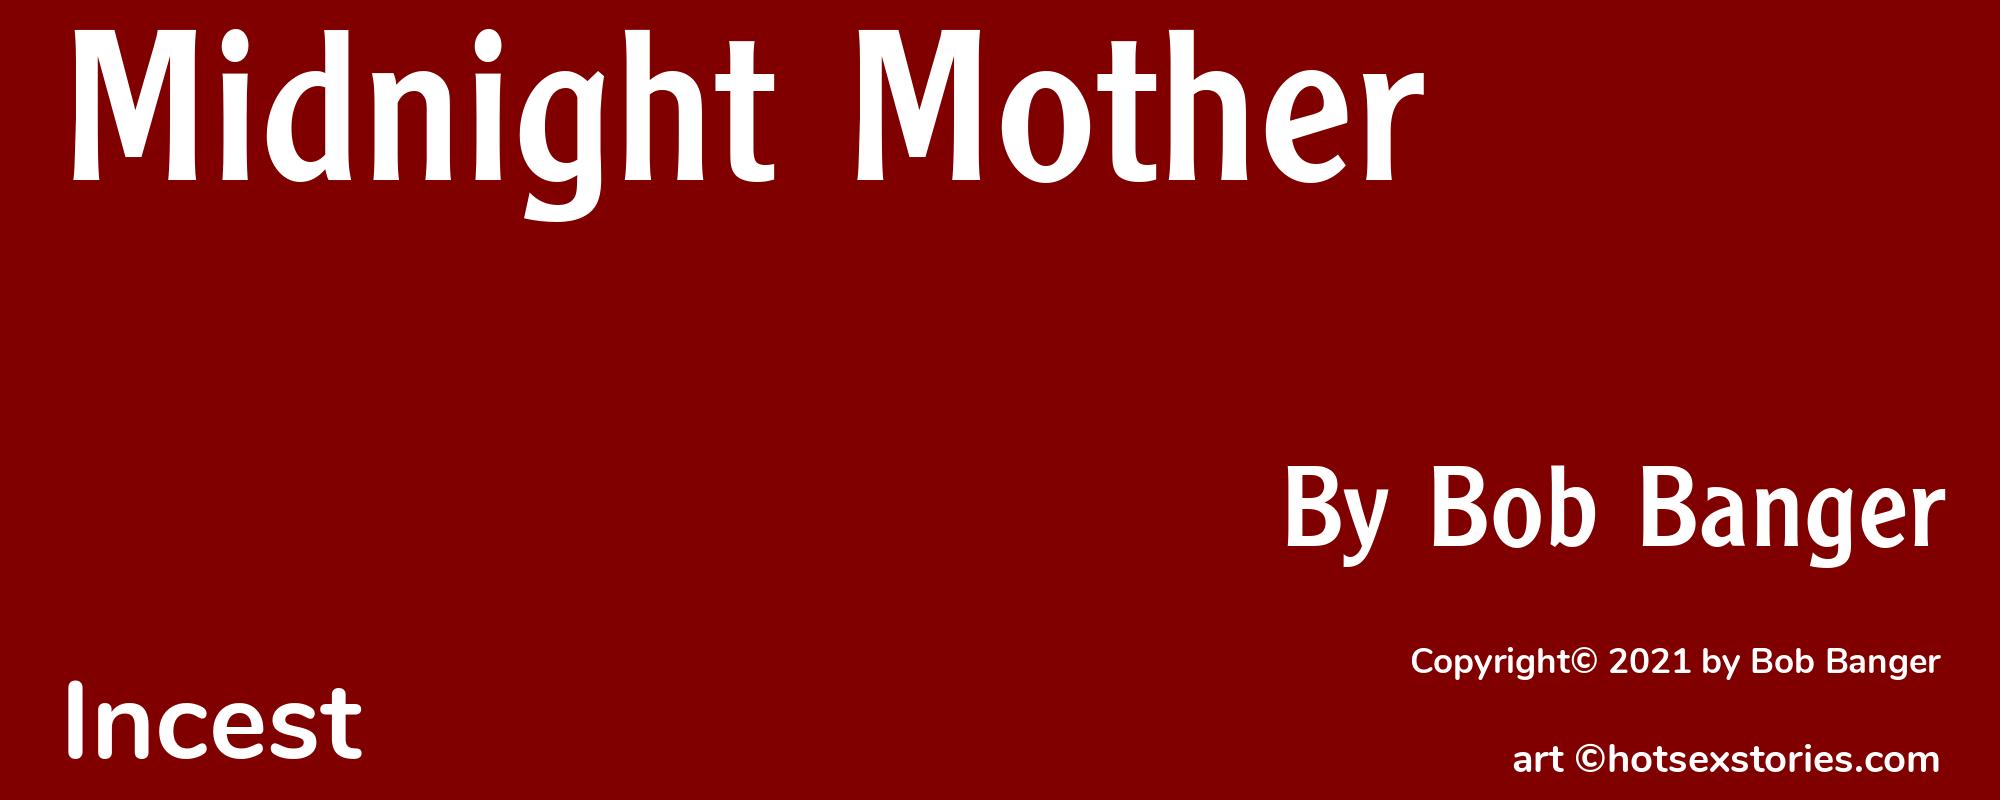 Midnight Mother - Cover